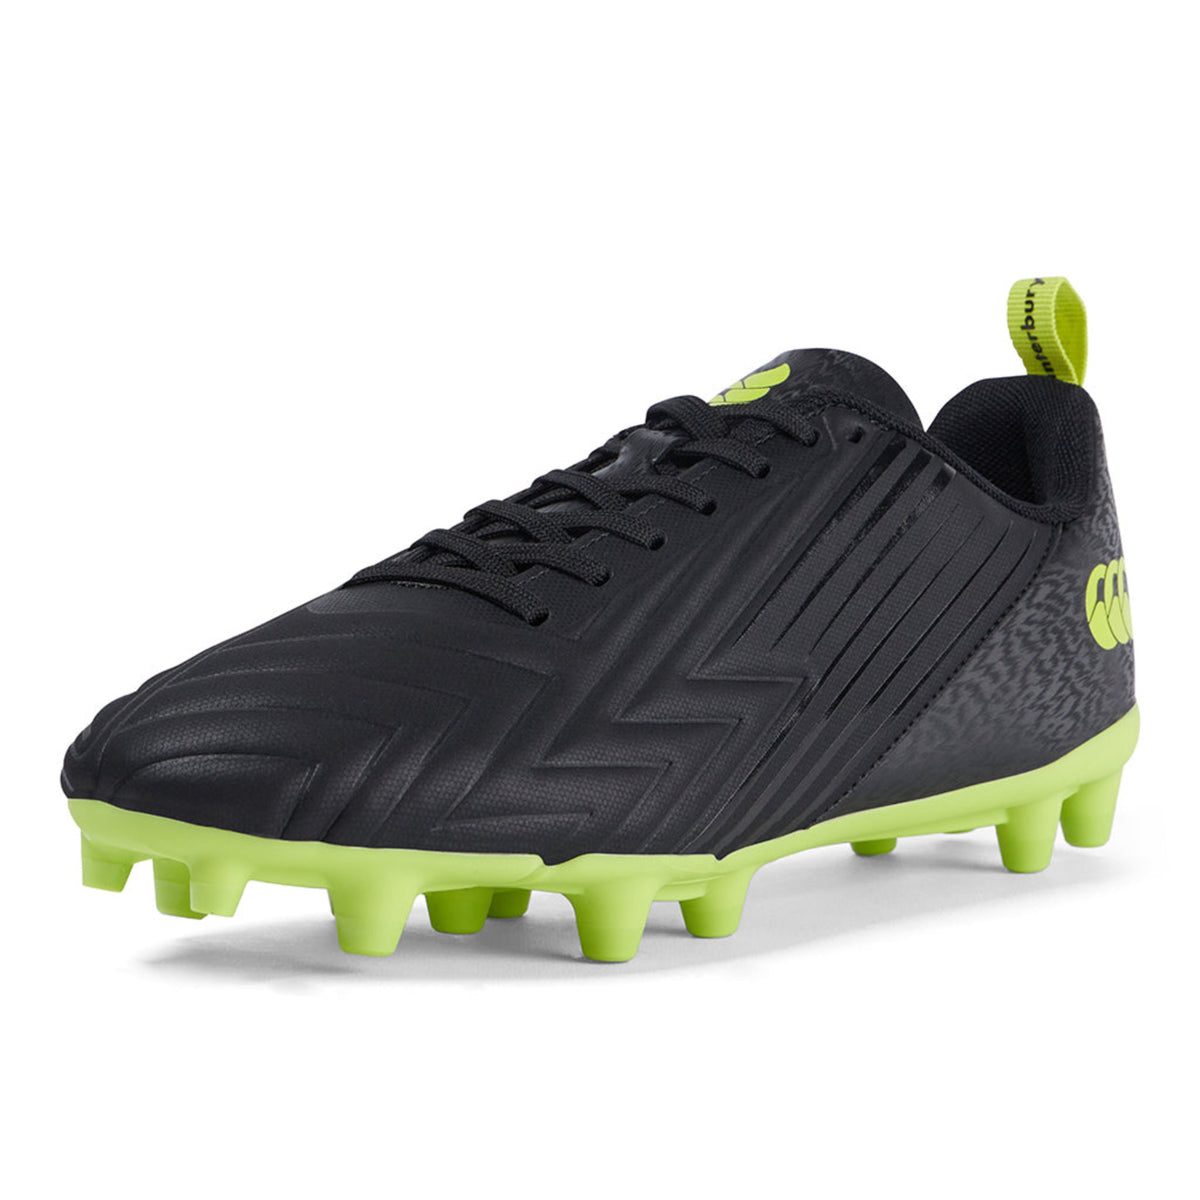 Canterbury Speed 3.0 FG Rugby Cleats a High-Performance Durable CCC Rugby Boot Black/Green Available in Unisex Sizing 6-16